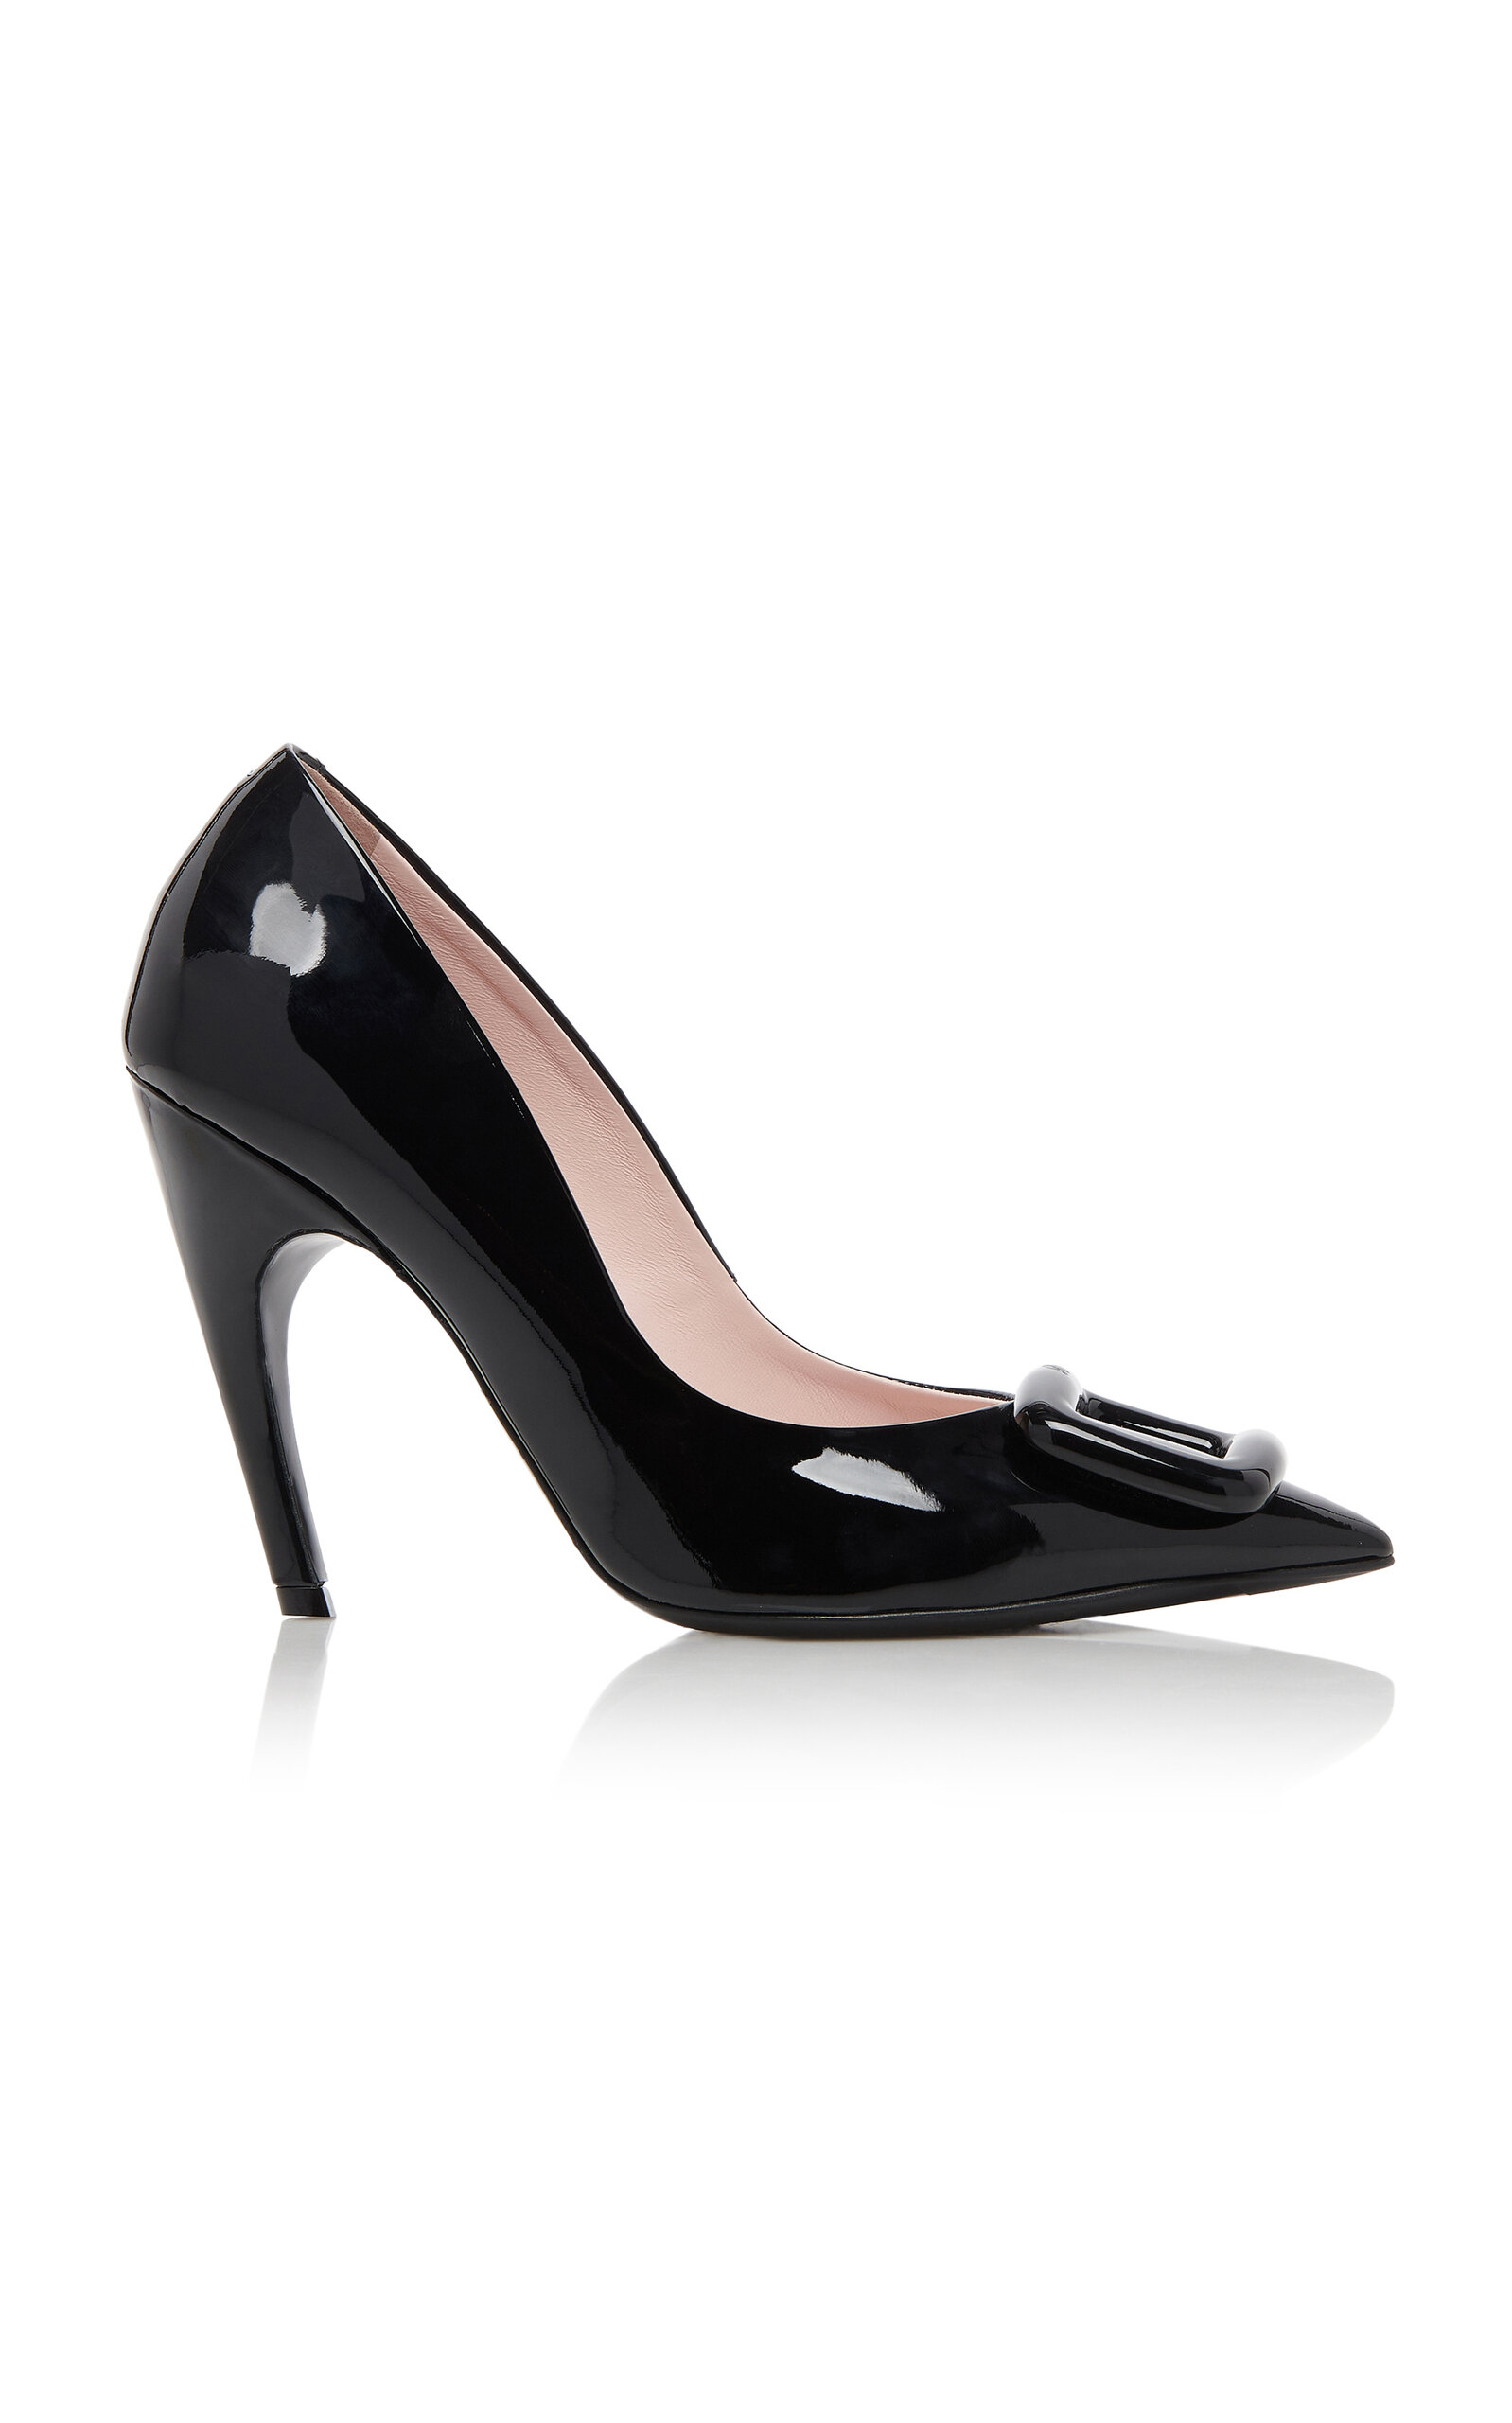 Roger Vivier Choc Buckle Patent Leather Pumps In Black